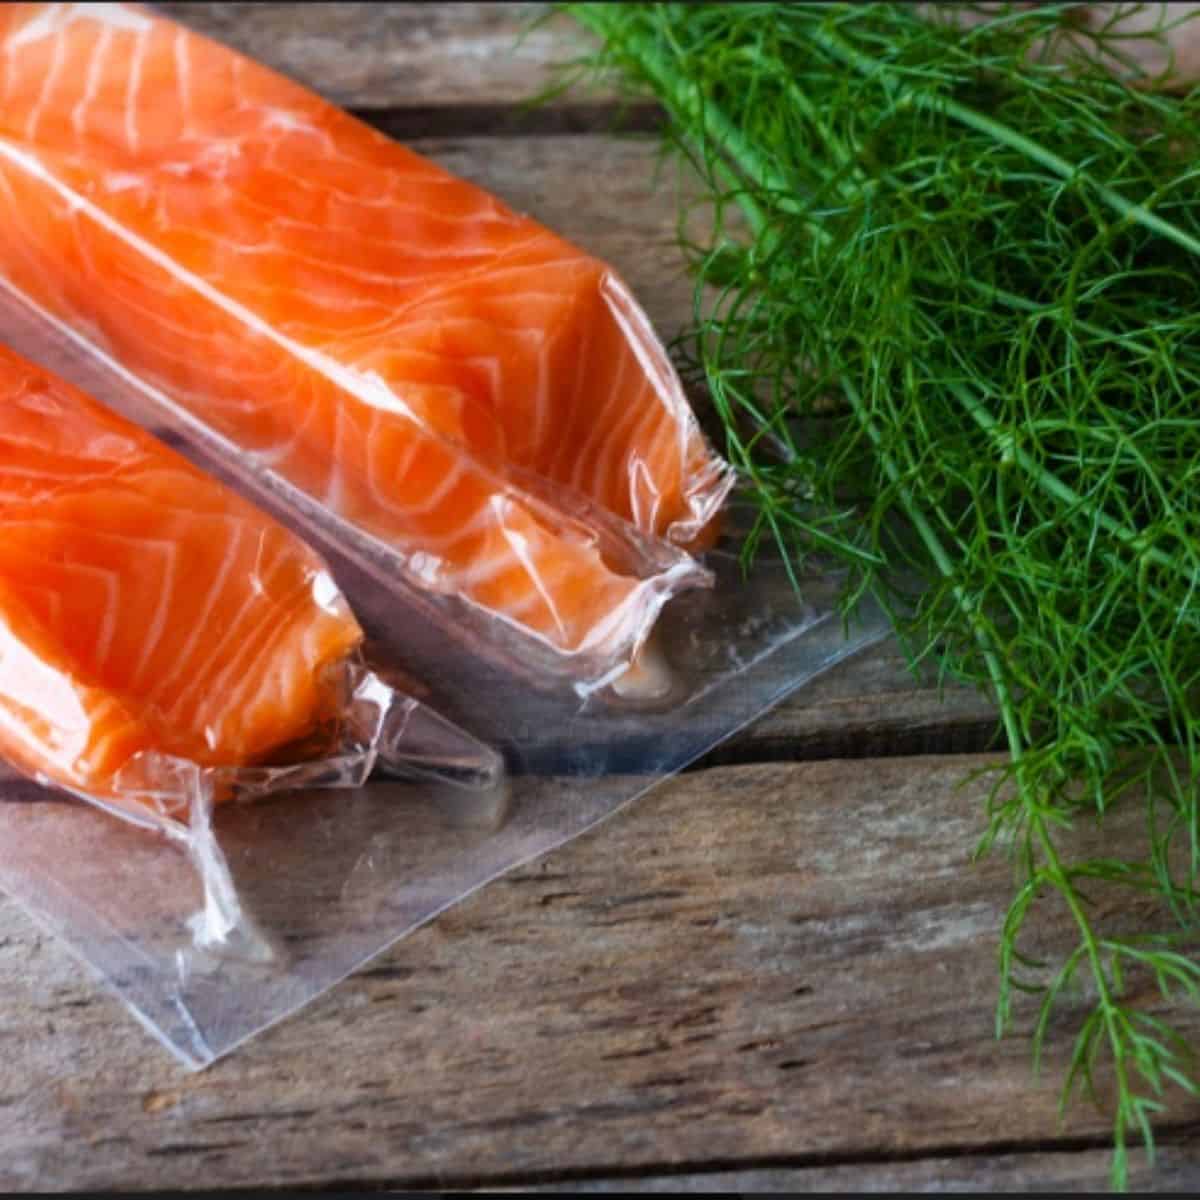 How to Seal Foods Without Using a Vacuum Sealer